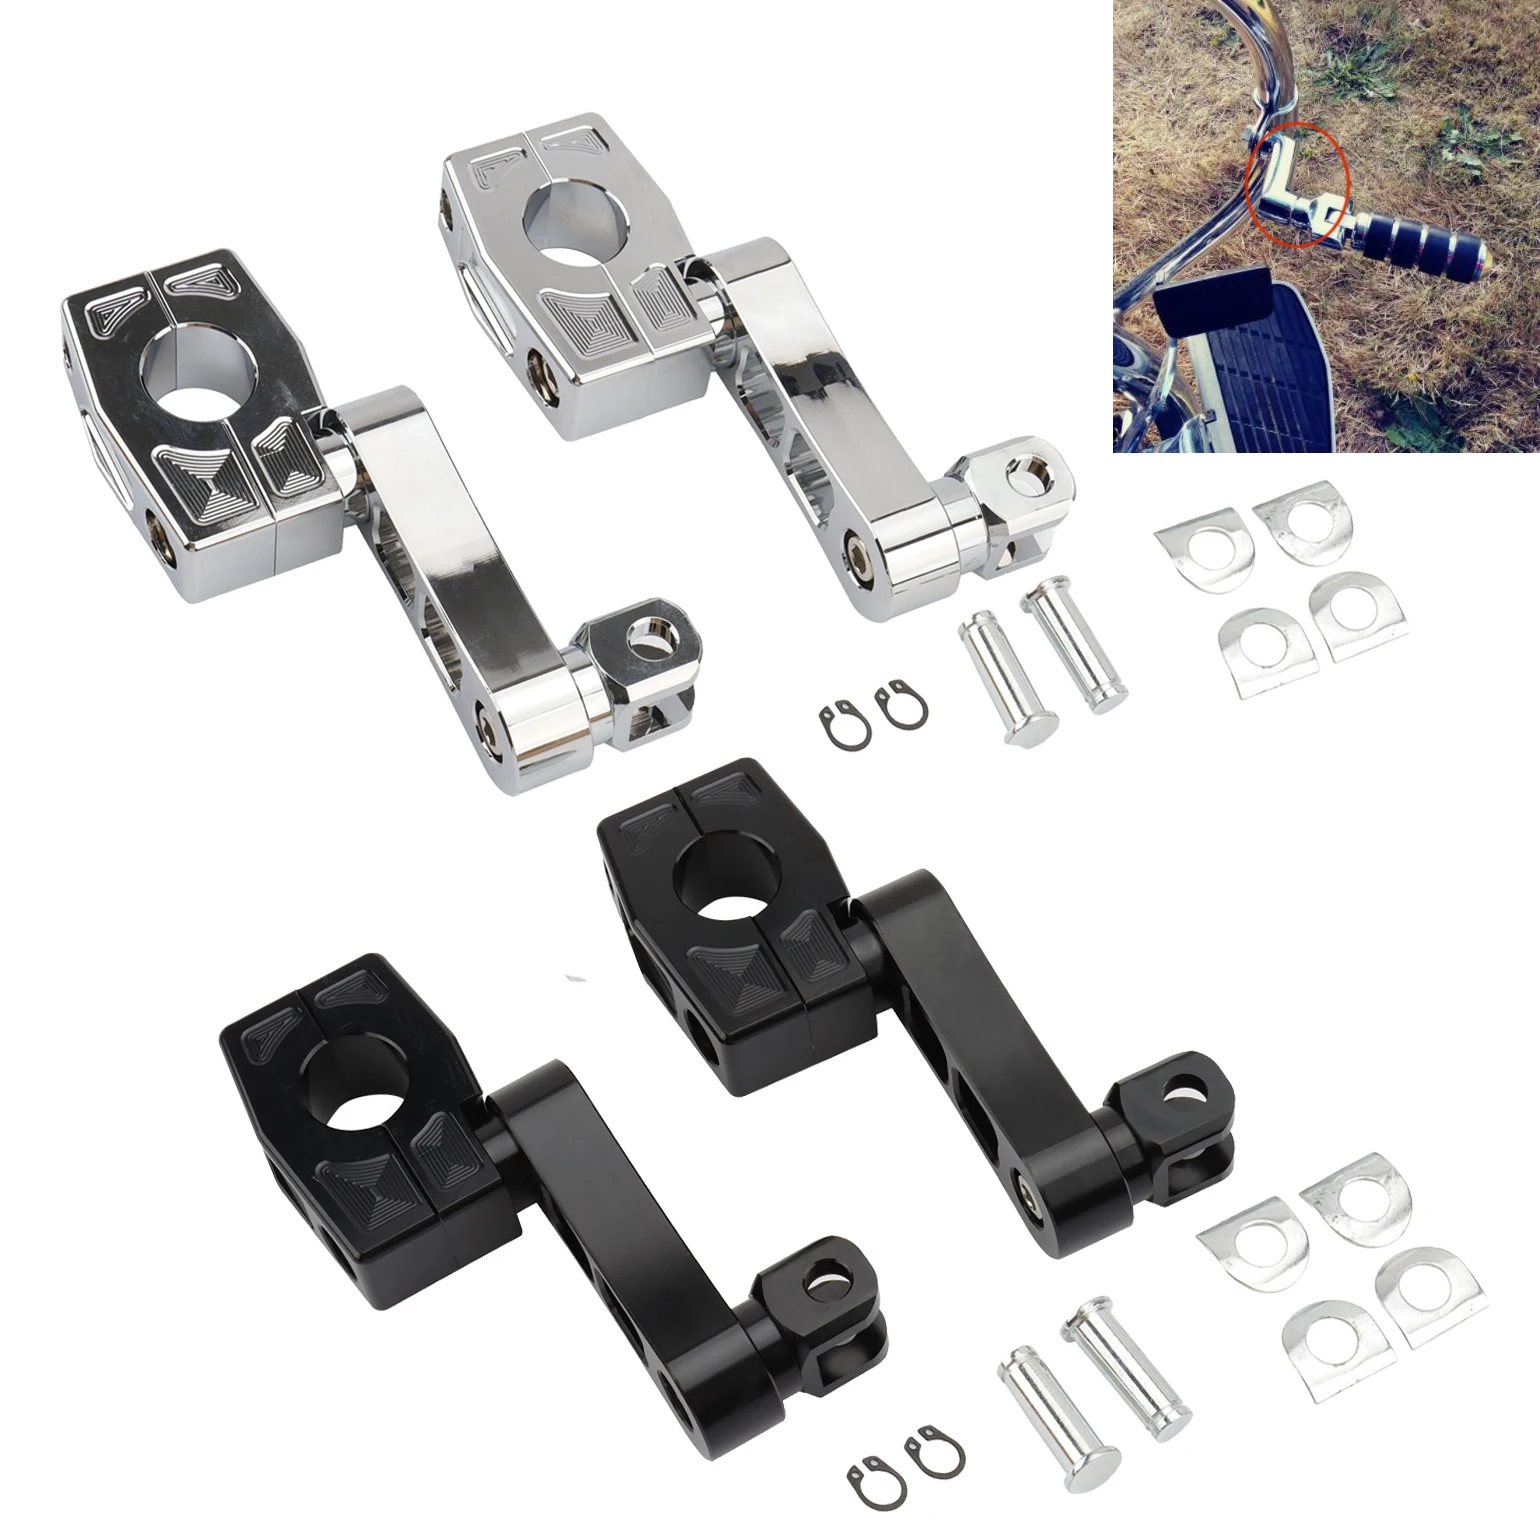 

Highway Pegs Engine Guard Mount Clamps Foot Pegs Extensions Bracket For Harley Touring Dyna Softail Sportster Cruiser 25/32/38mm